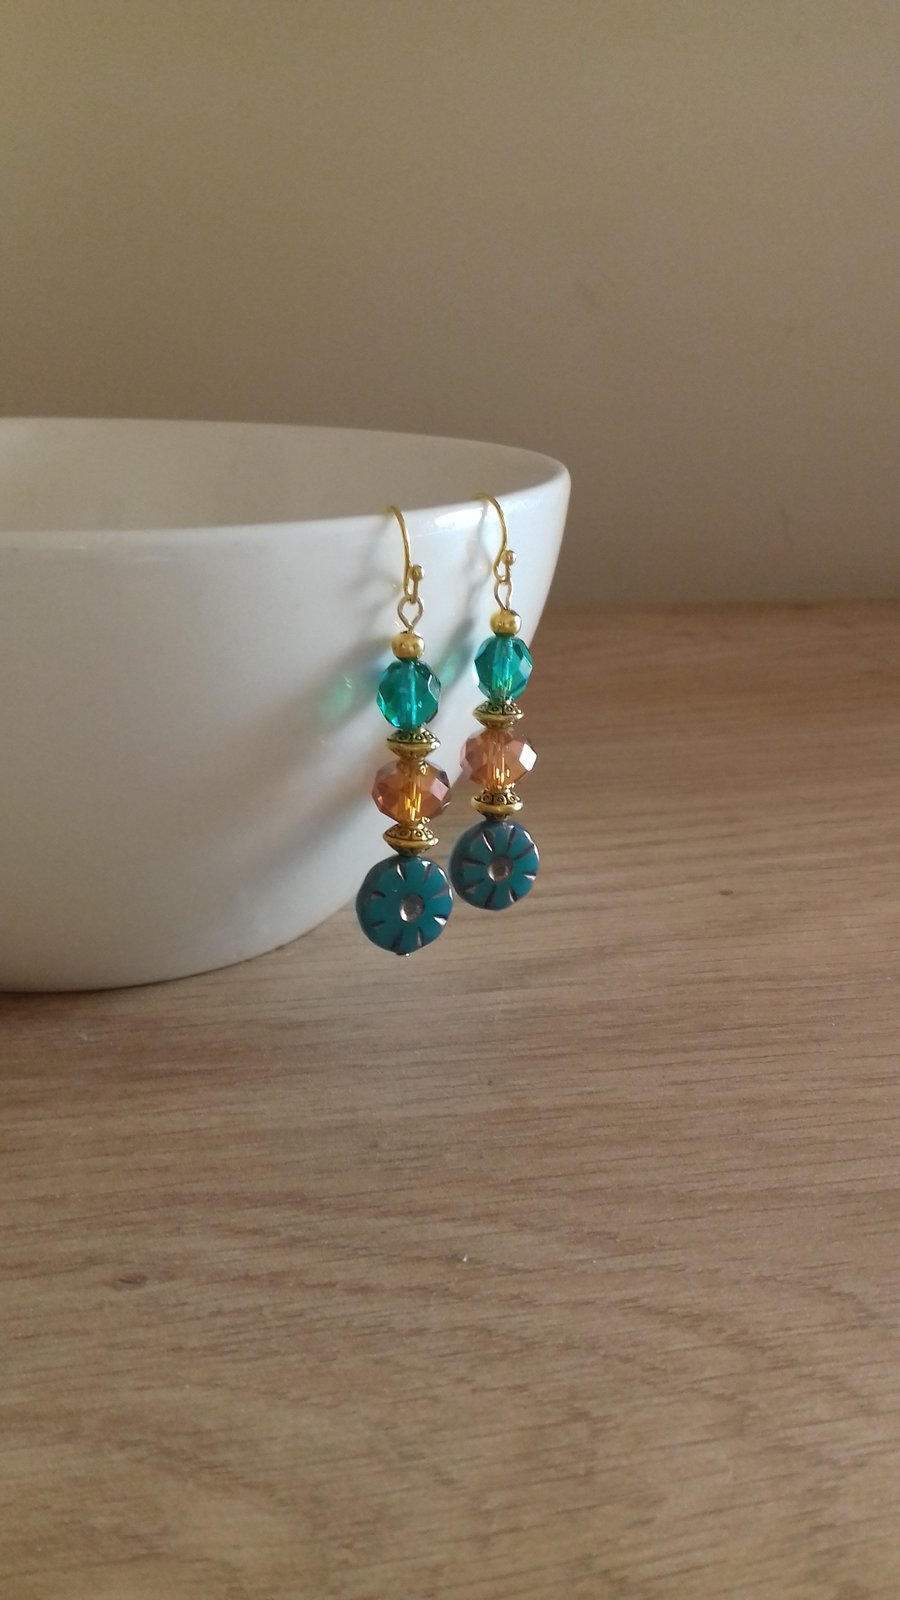 TEAL, COPPER AND GOLD FLOWER DESIGN EARRINGS.